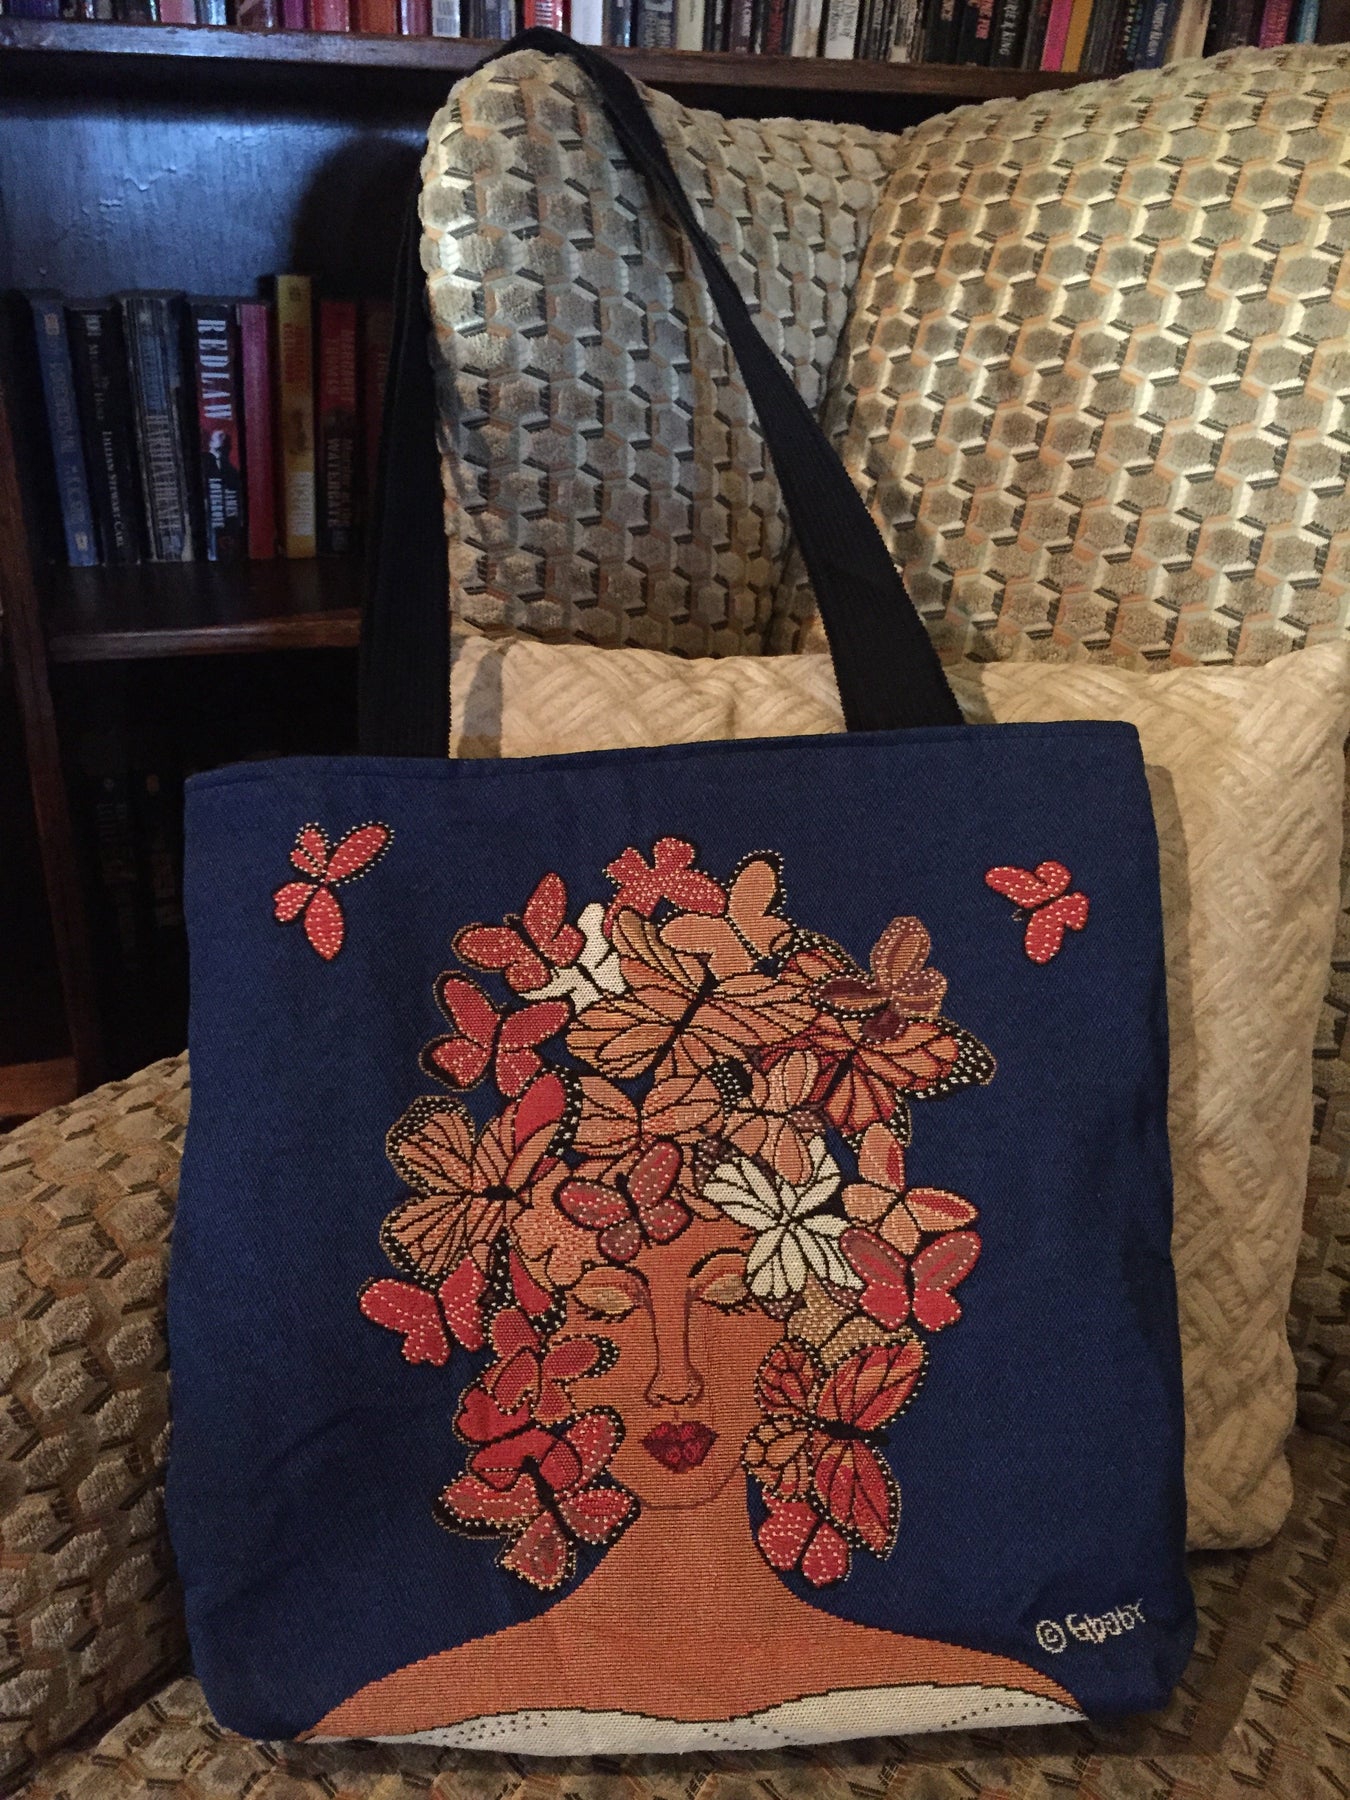 2 of 2: Release, Relax, Renew: African American Woven Tapestry Tote Bag by GBaby